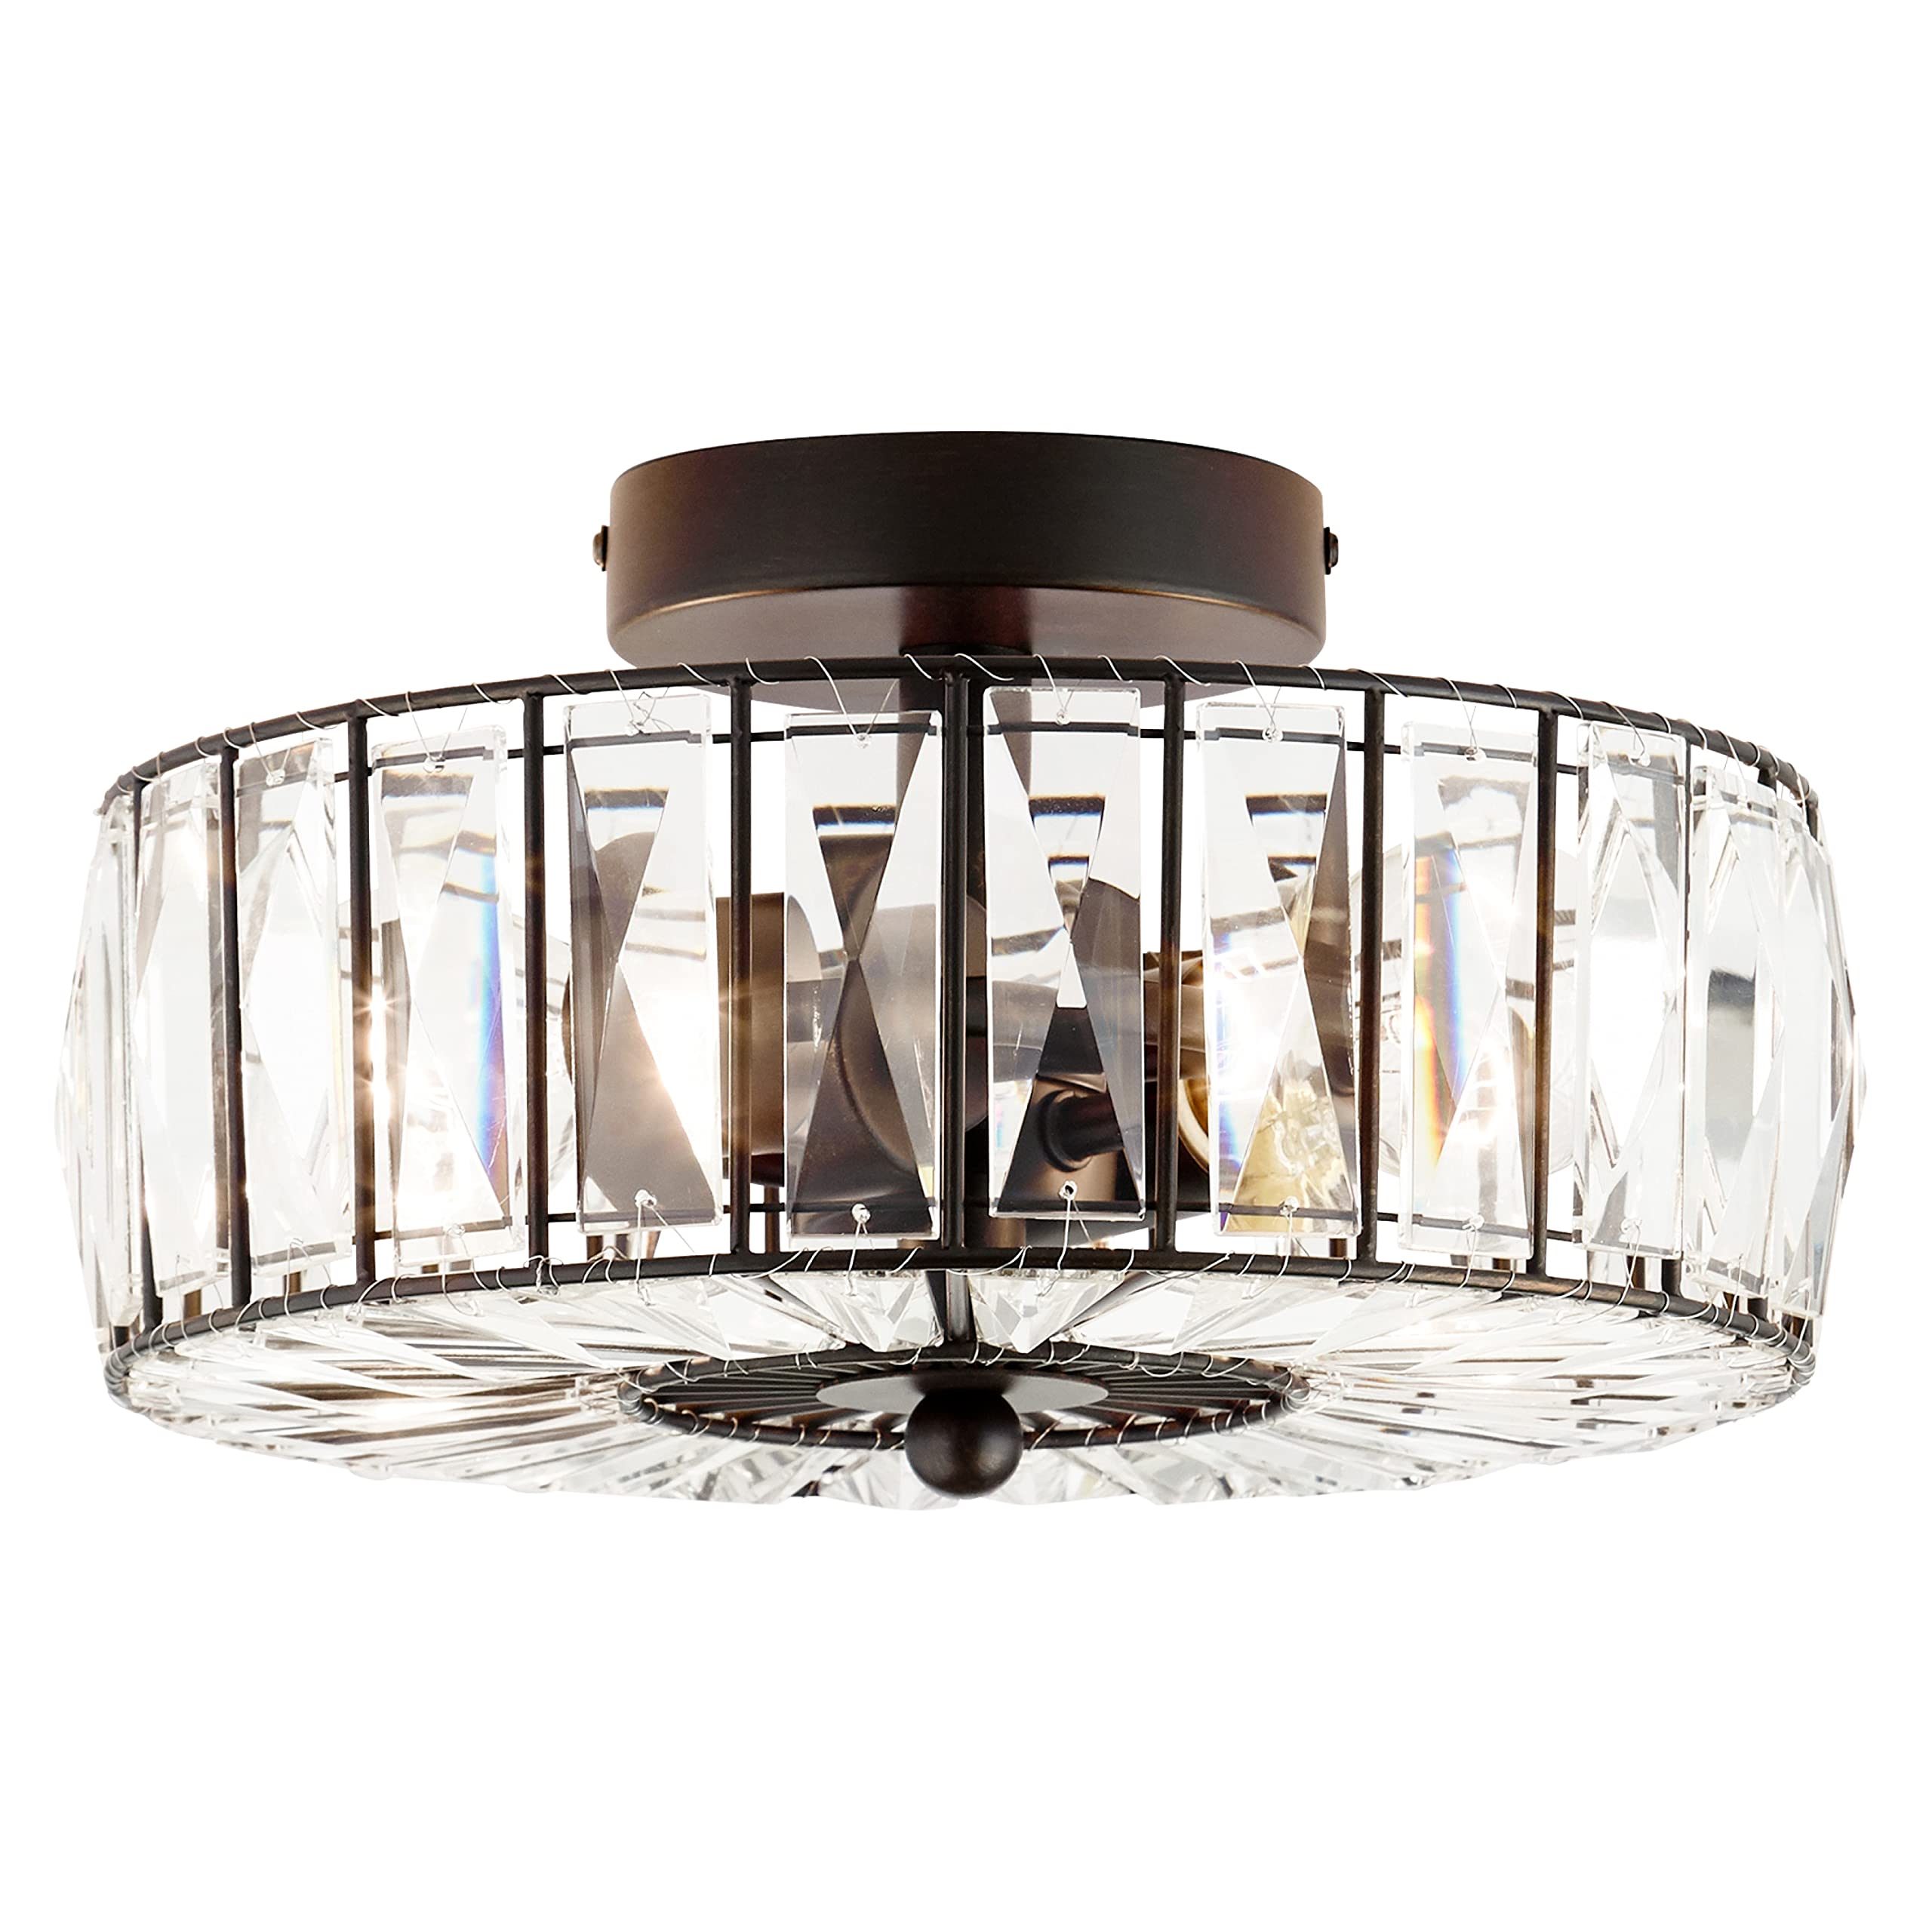 River of goods glam ceiling Light, 1125 Inch Semi-Flush Mount ceiling Light Fixture, Oil Rubbed Bronze and crystal